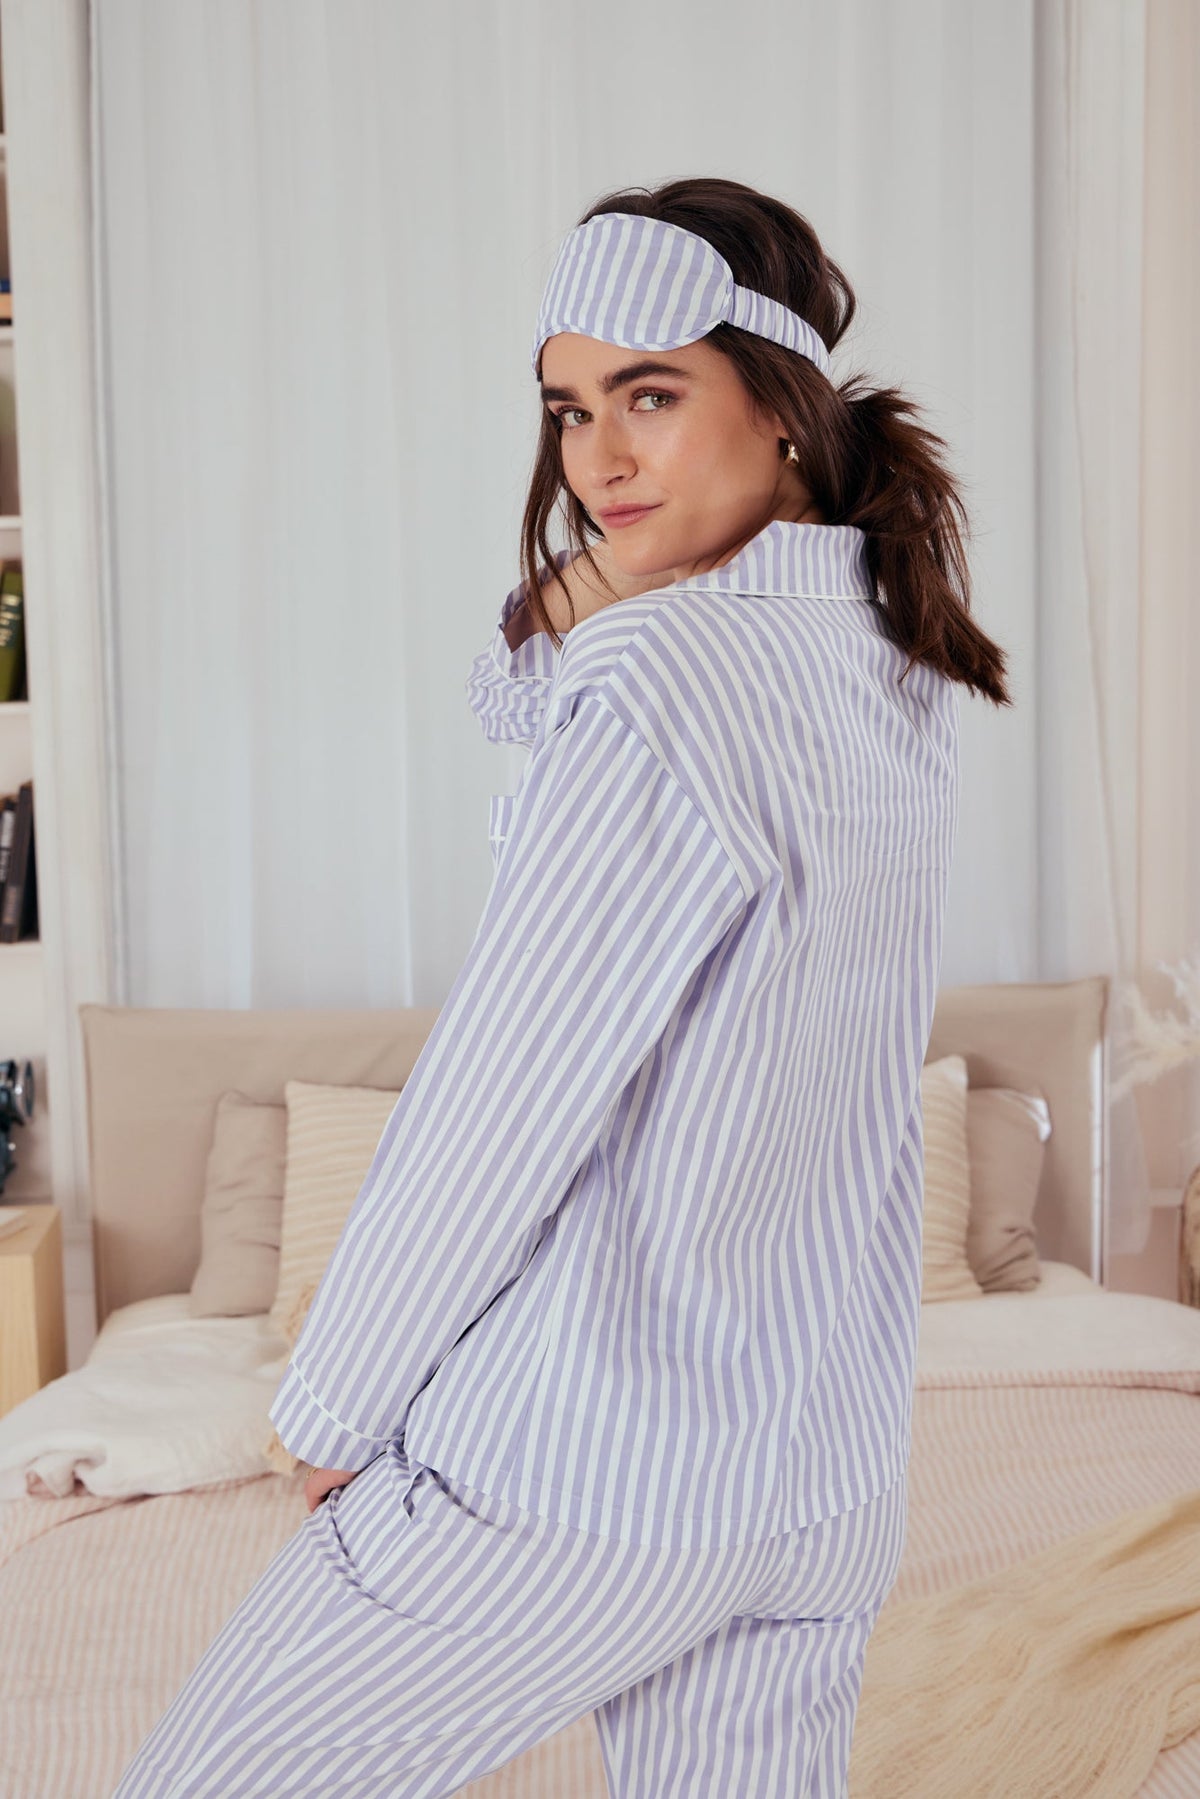 A lady wearing a long sleeve cotton sateen pj set with blue and white stripe pattern.